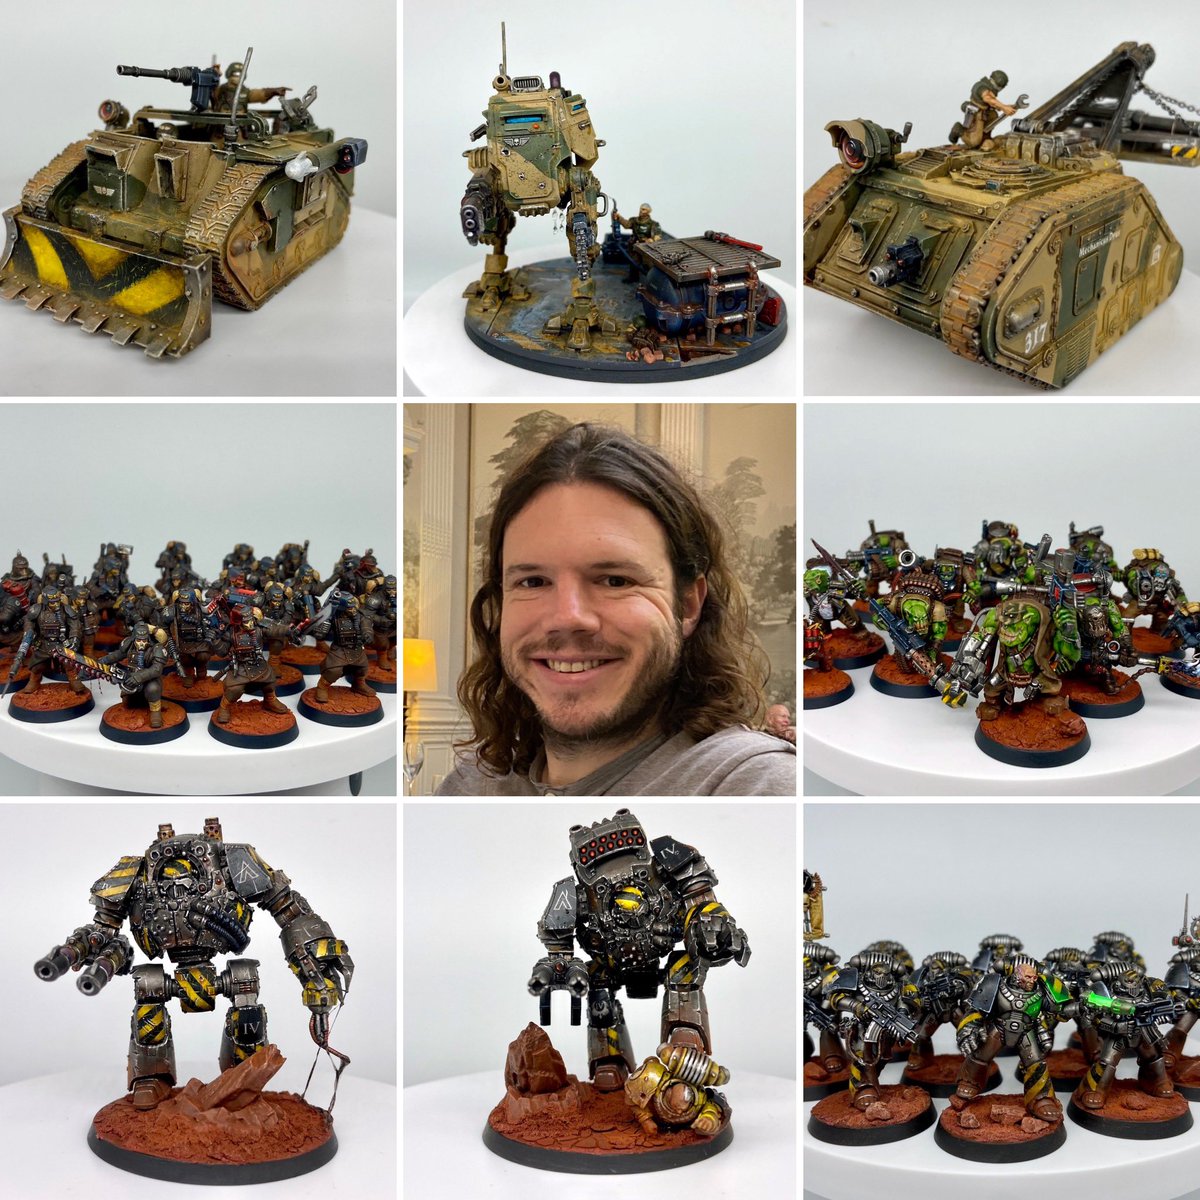 It’s been 18 months since I did an Artist vs Art post. So, hello! This is me, Jake, along with some of my models completed over the last six months. #artistvsart #artistvsart2024 #astramilitarum #imperialguard #warhammer40k #40k #wh40k #warhammer #WarhammerCommunity #ironwarriors